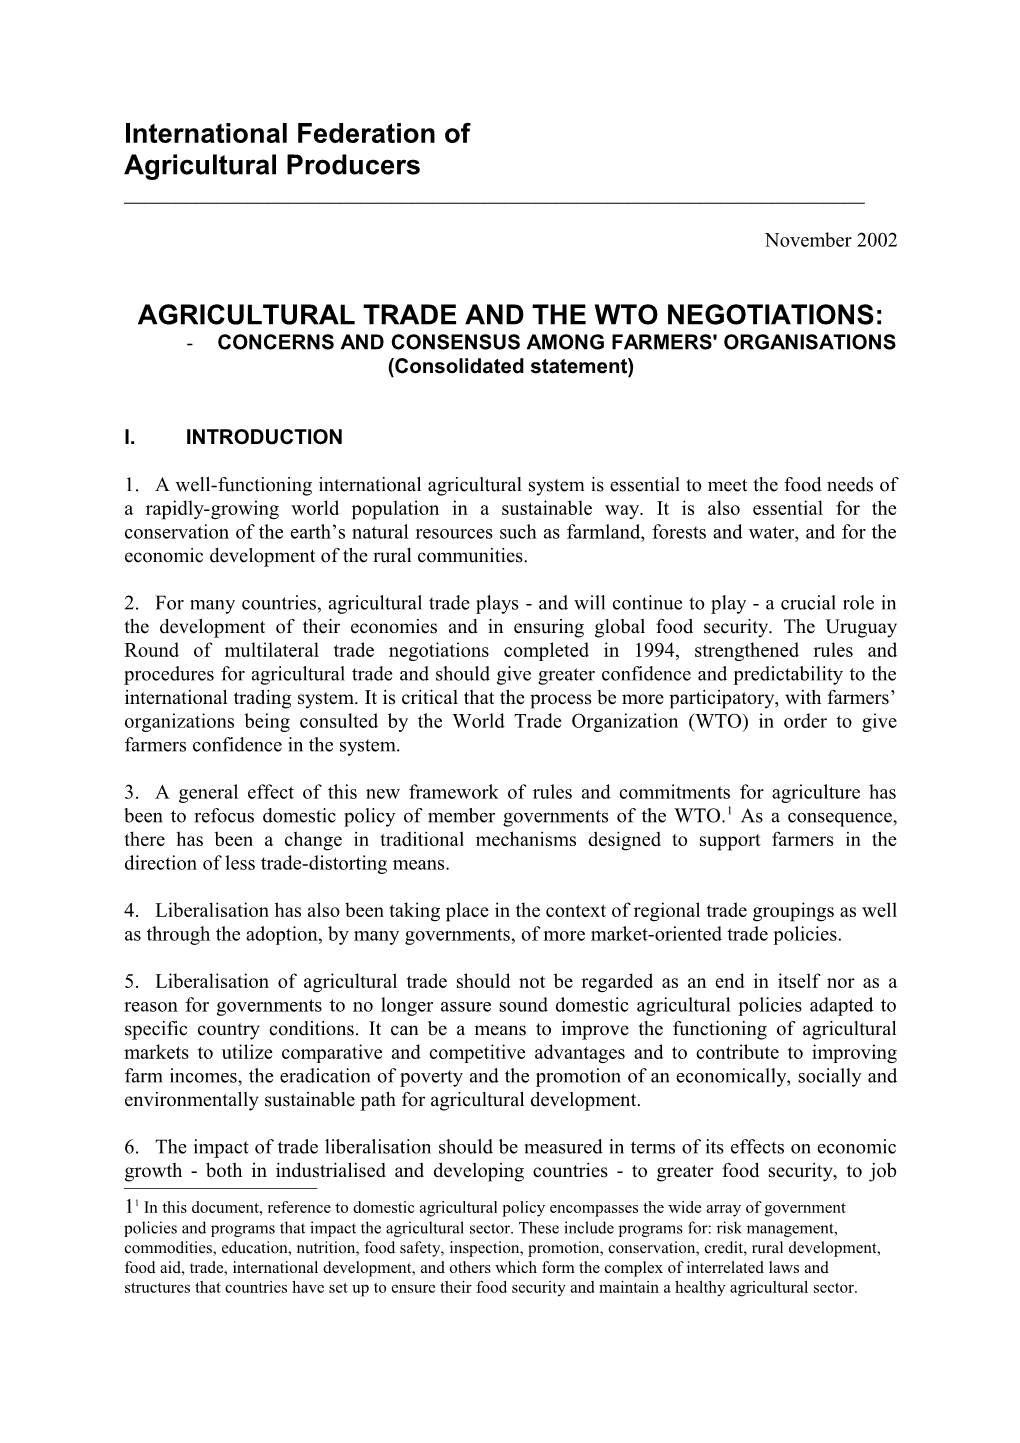 Agricultural Trade and the Wto Negotiations